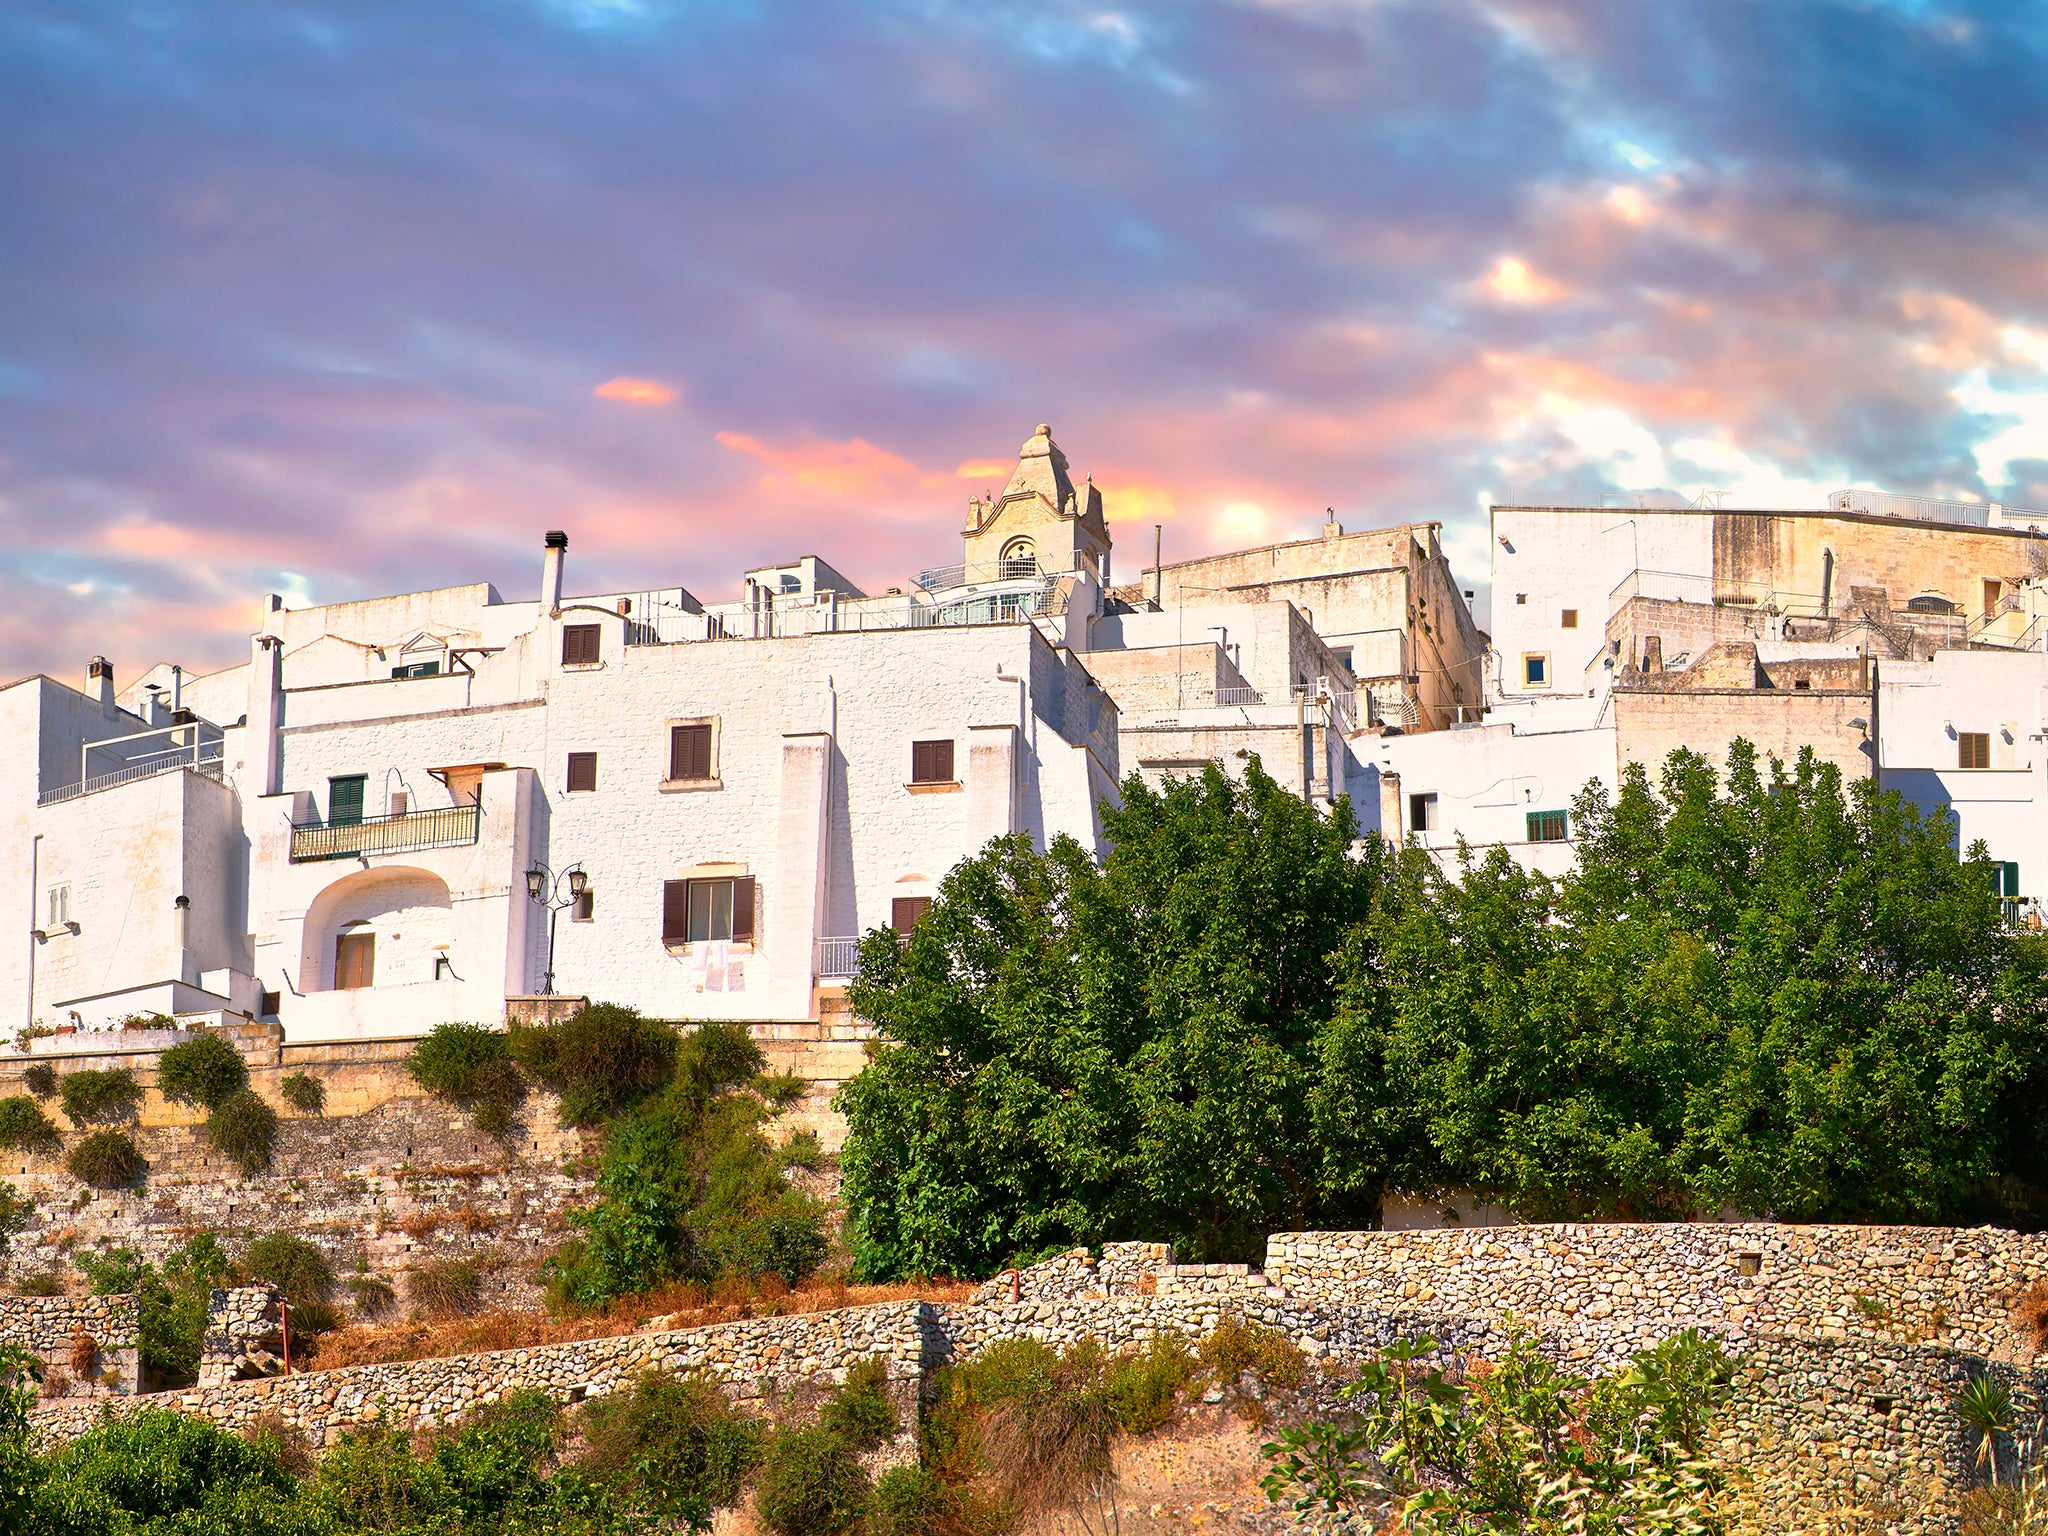 The medieval white fortified hill town walls of Ostuni, The White Town, Puglia, Italy.